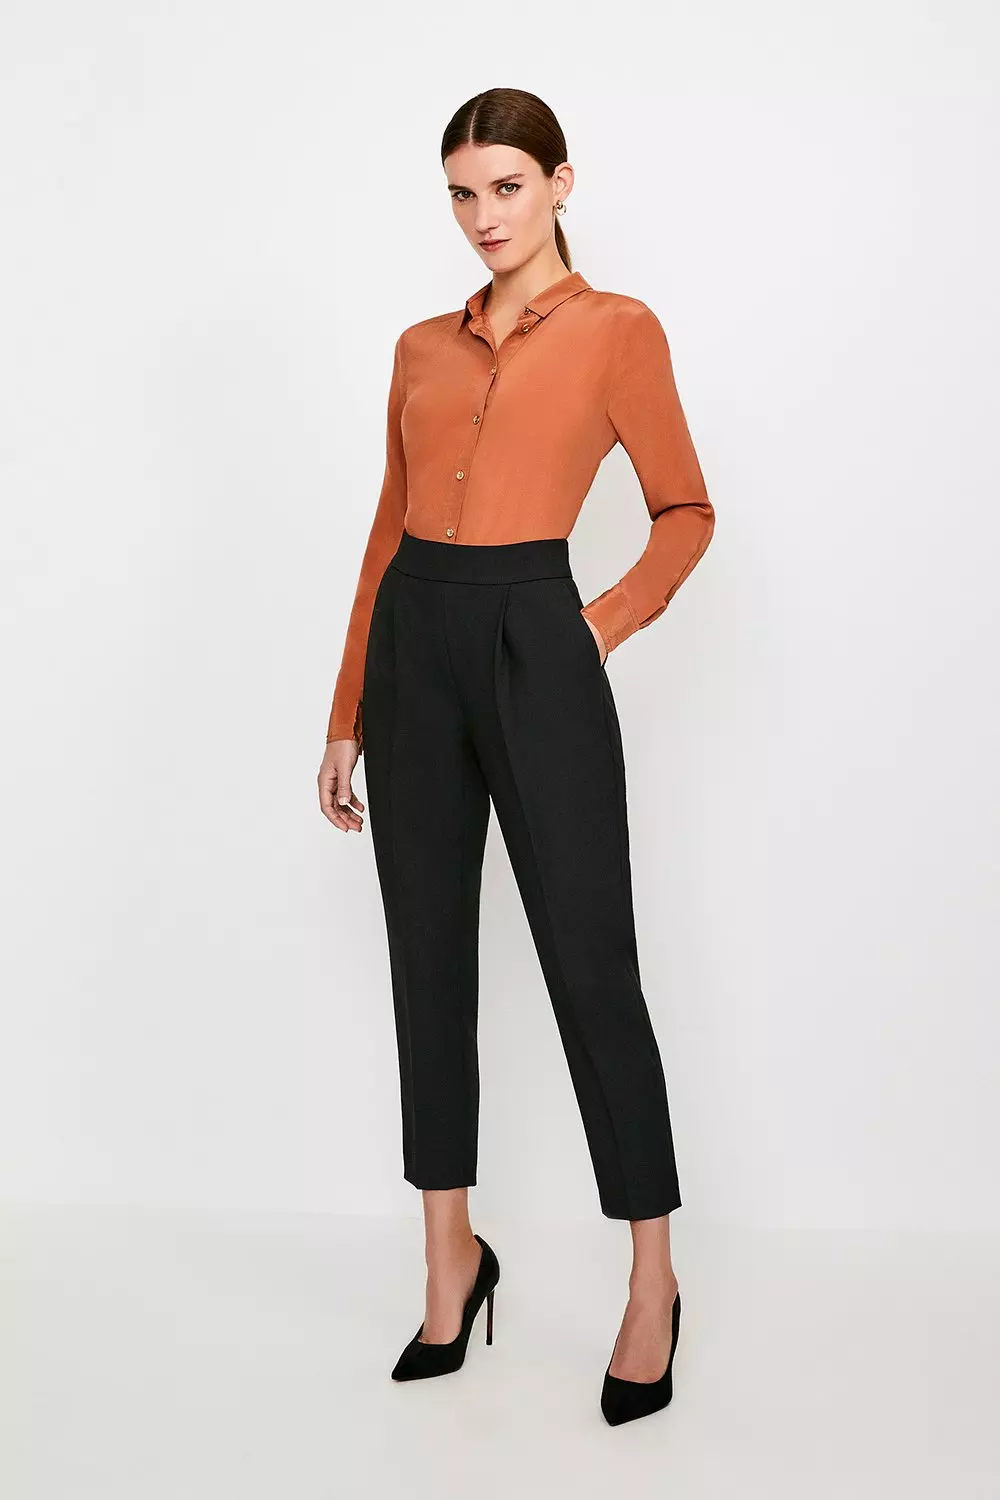 Express high waisted sash tie ankle pant  High waisted pants, Petite dress  pants, High waisted tie pants